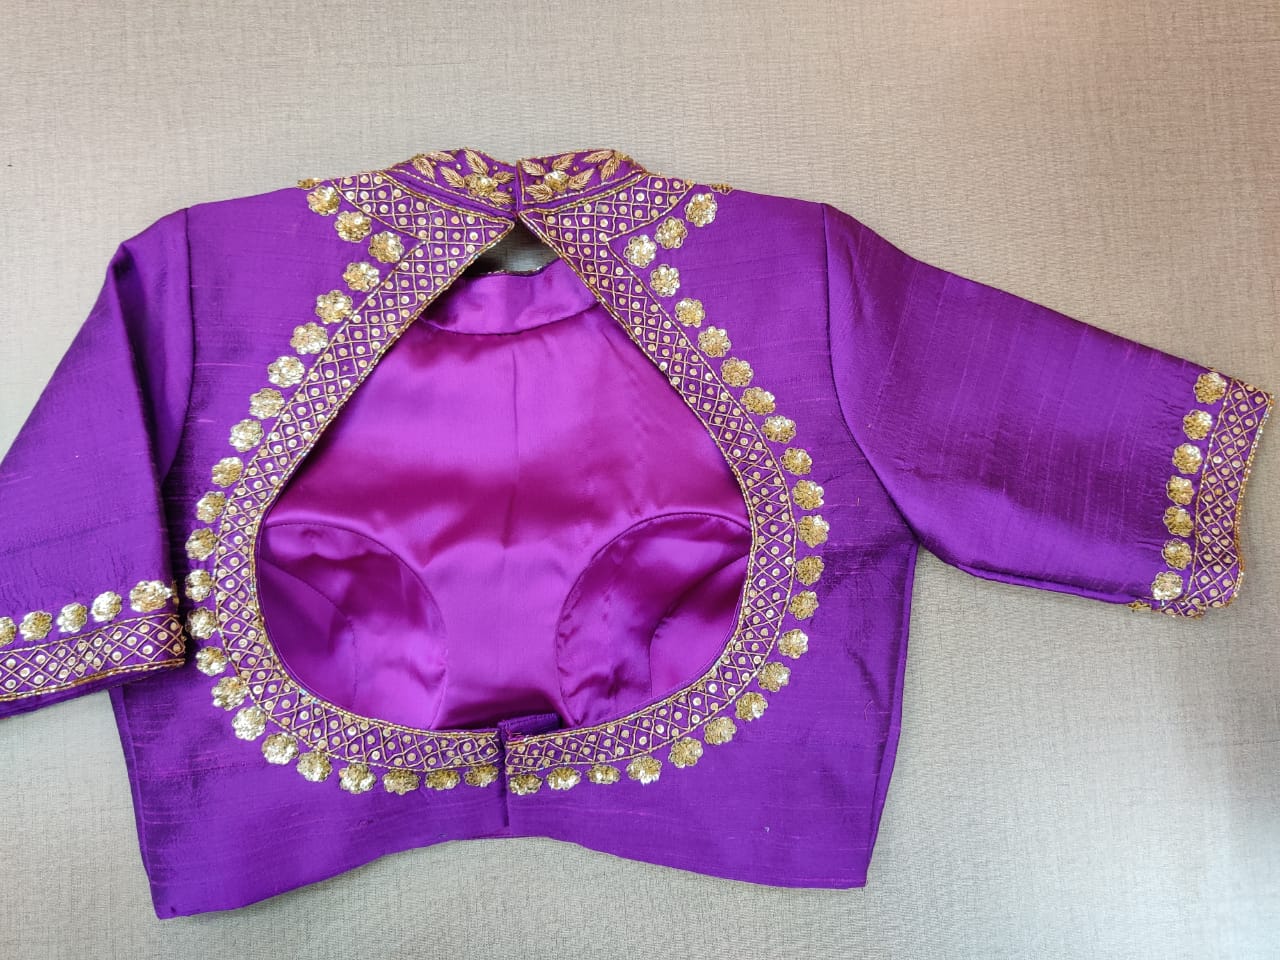 Buy stunning purple embroidered designer sari blouse online in USA. Elevate your Indian ethnic sari looks with exquisite readymade saree blouse, embroidered saree blouses, Banarasi sari blouse, designer saree blouse from Pure Elegance Indian clothing store in USA.-back